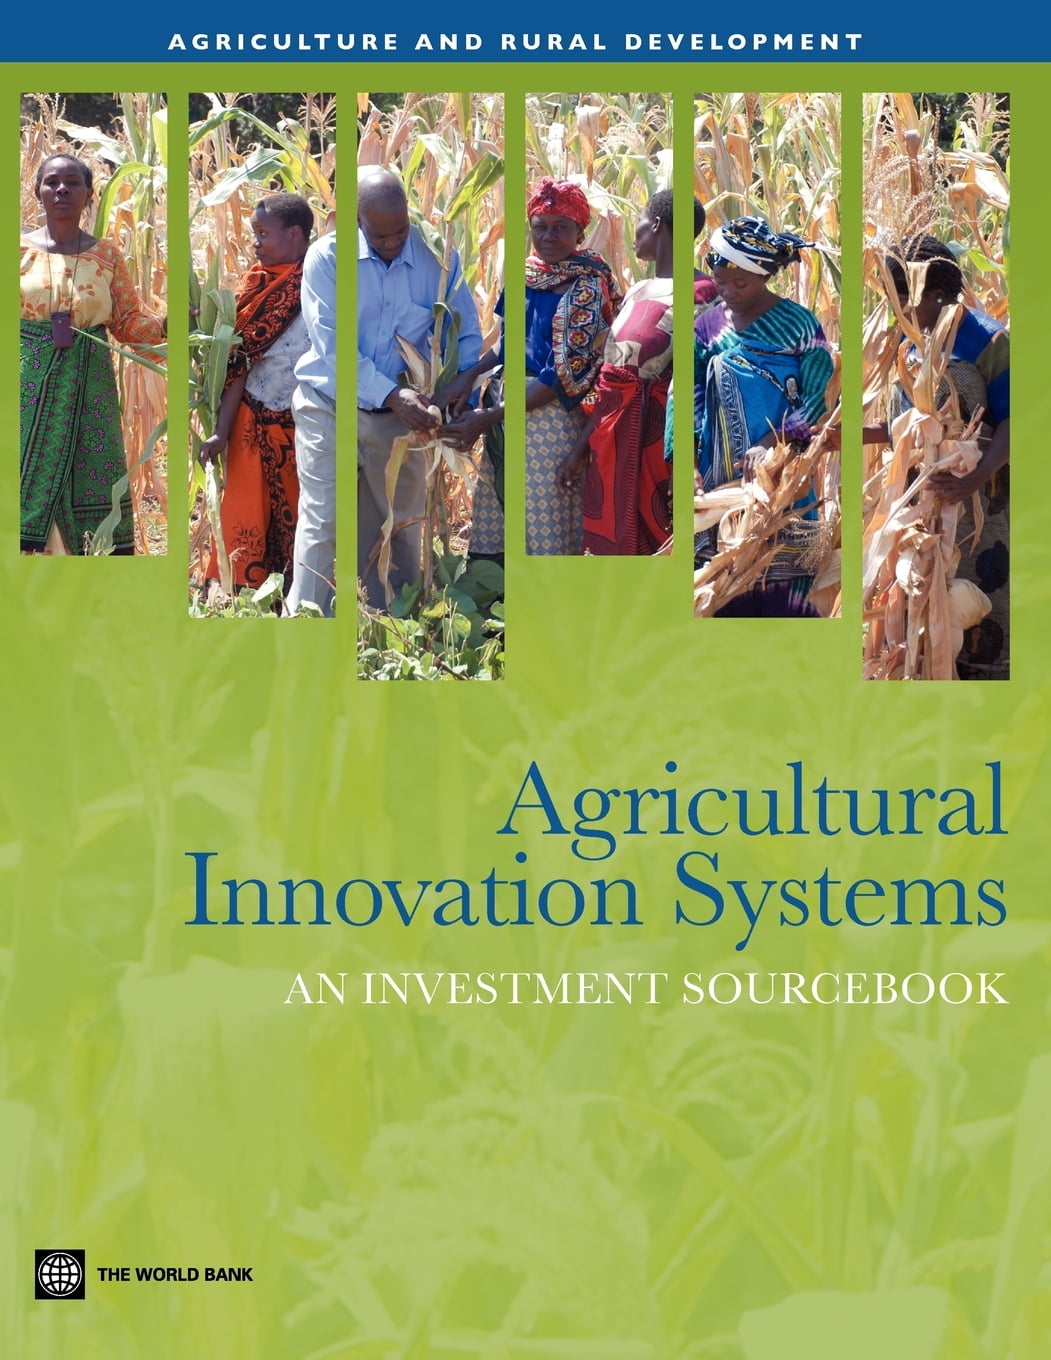 research topics in agriculture and rural development